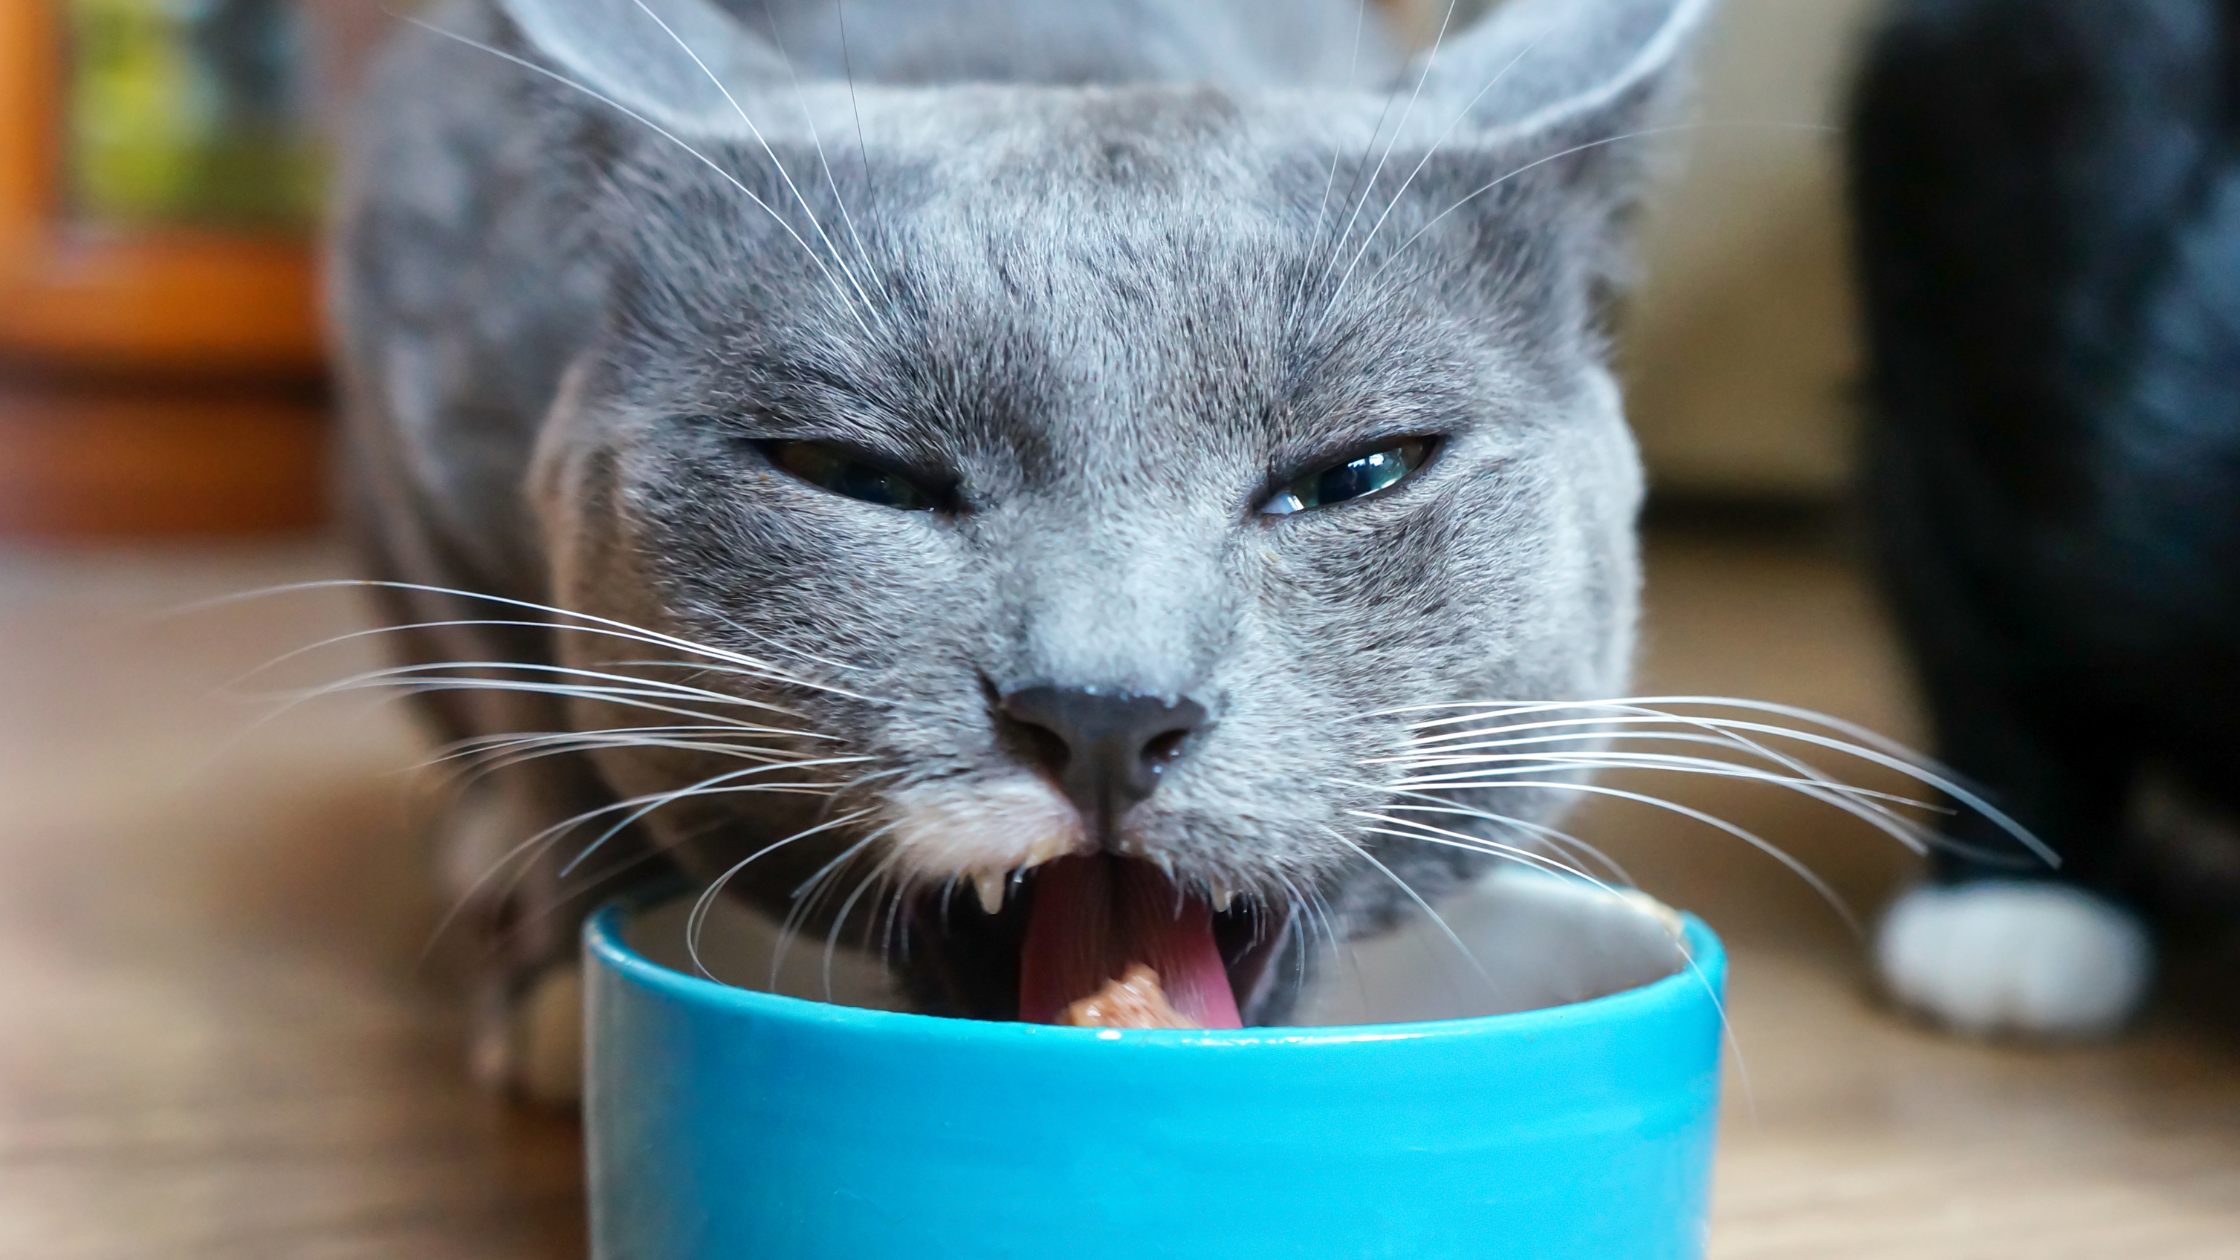 a gray cat eating from a blue bowl